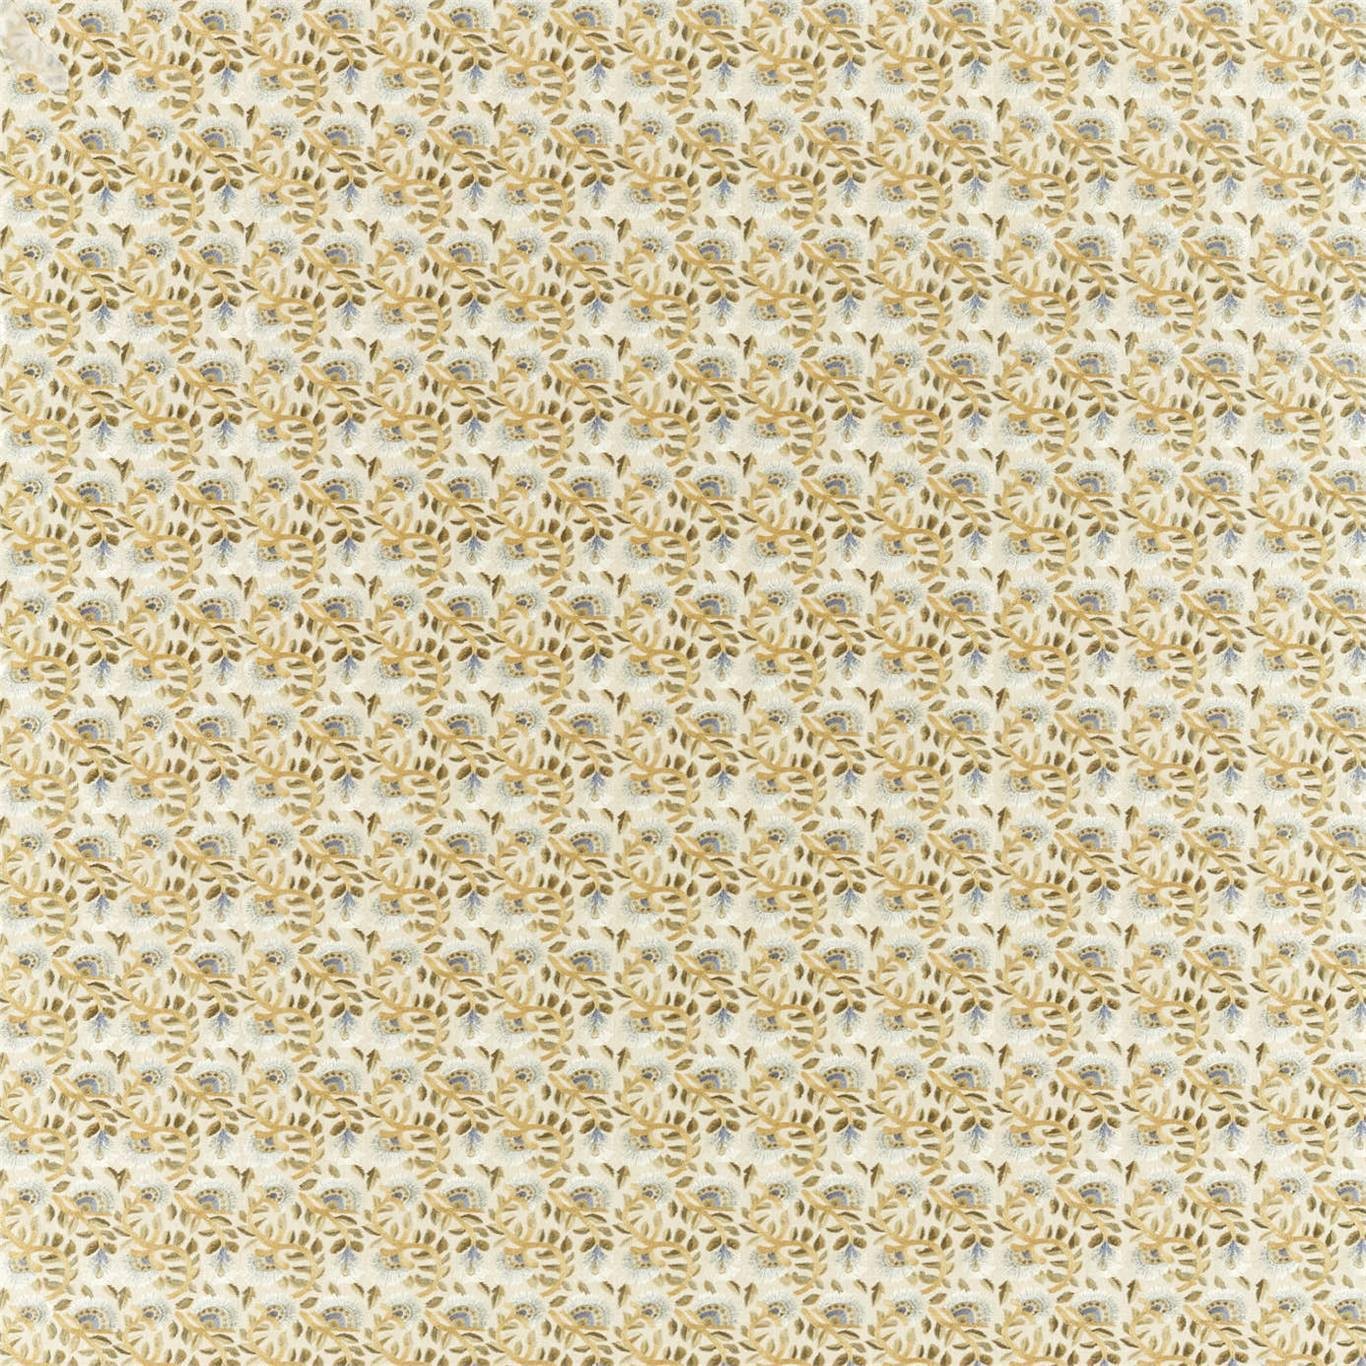 a close up of a white and gold pattern on fabric